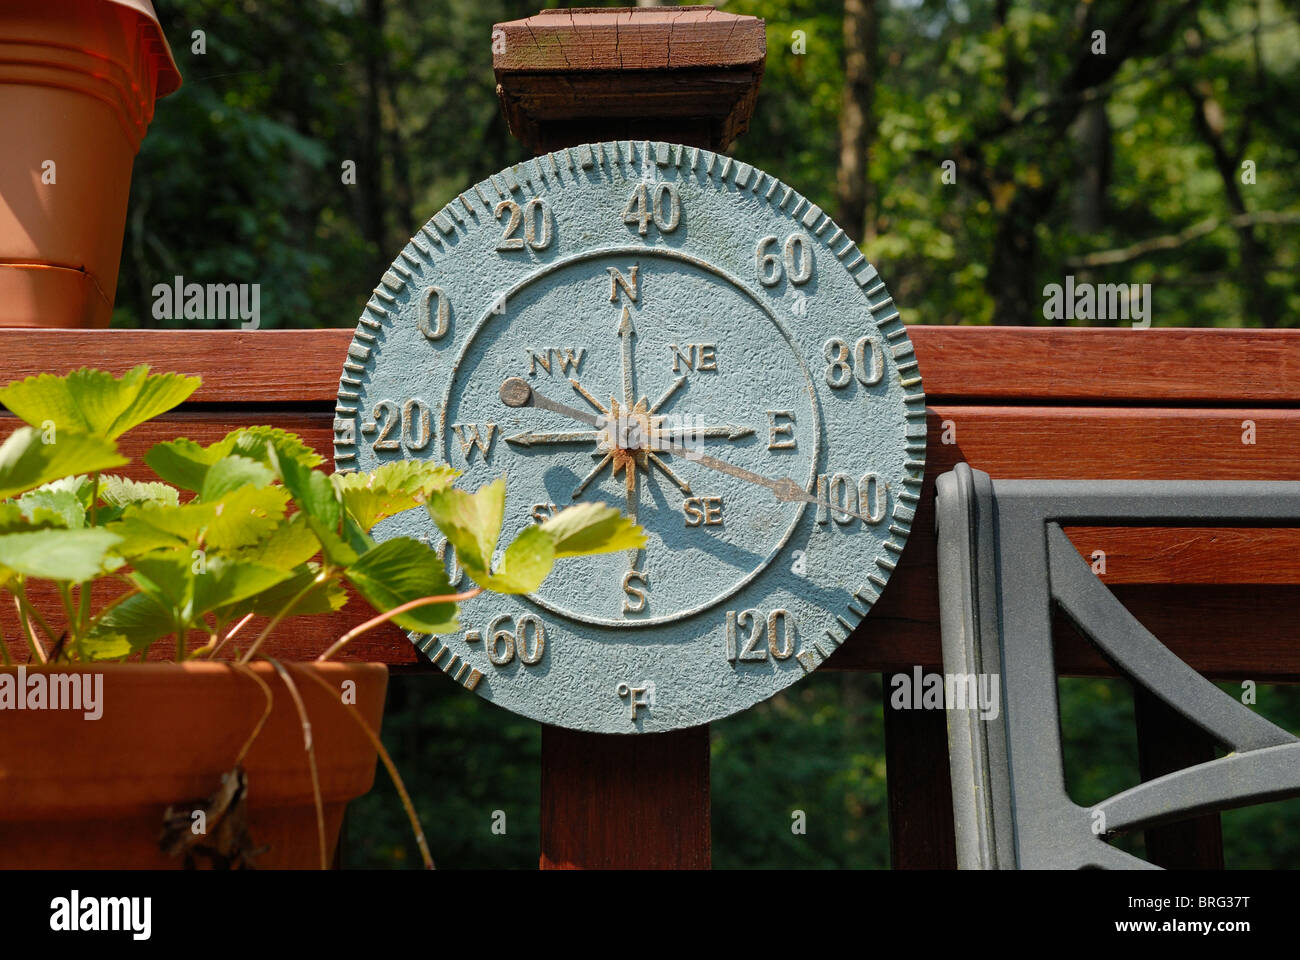 https://c8.alamy.com/comp/BRG37T/outdoor-thermometer-in-the-hot-sun-BRG37T.jpg